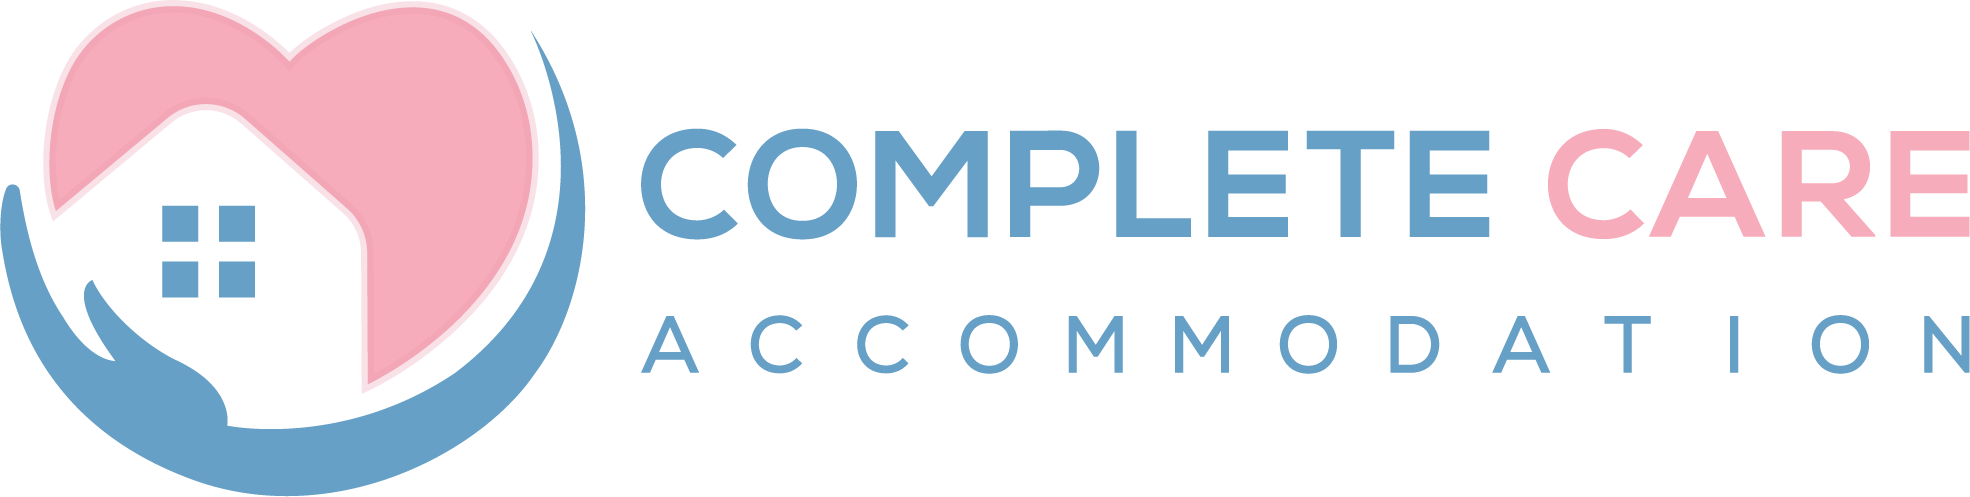 Complete Care Accommodation